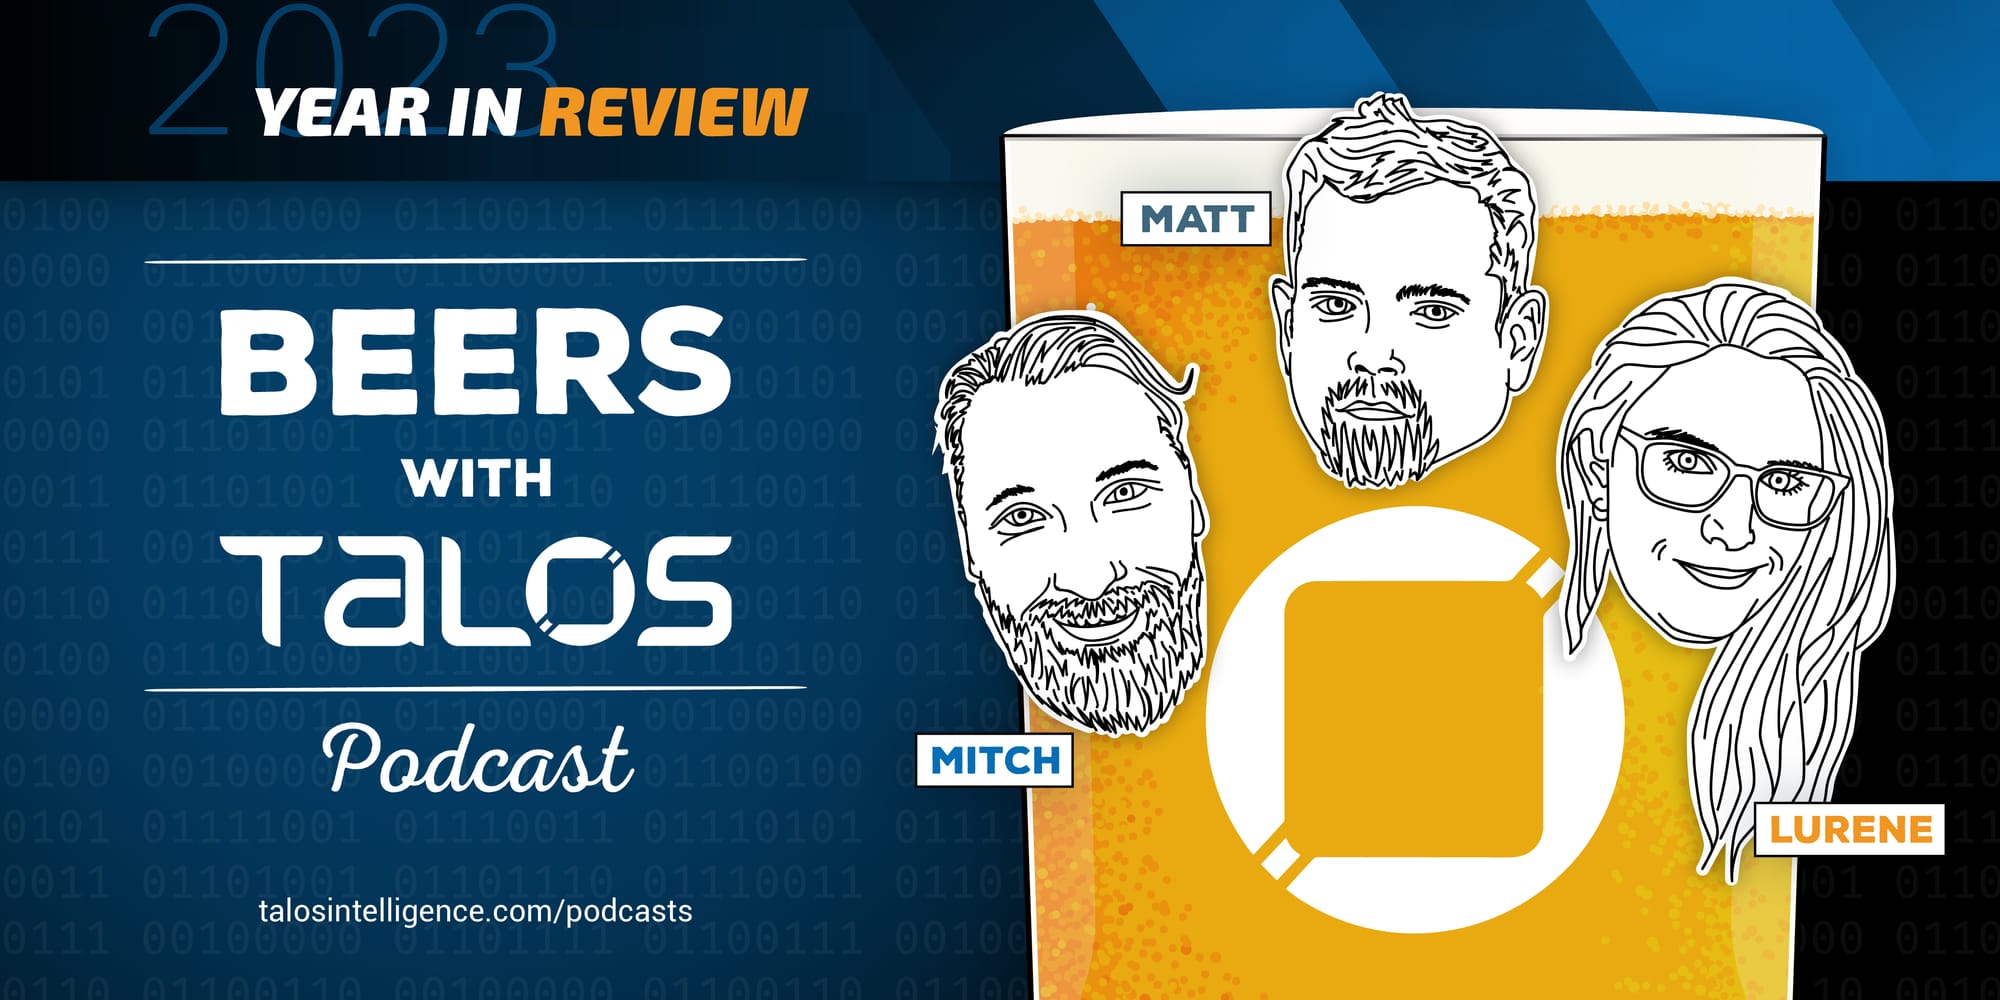 Beers with Talos episode 141: The TurkeyLurkey Man wants YOU to read Talos' Year in Review report